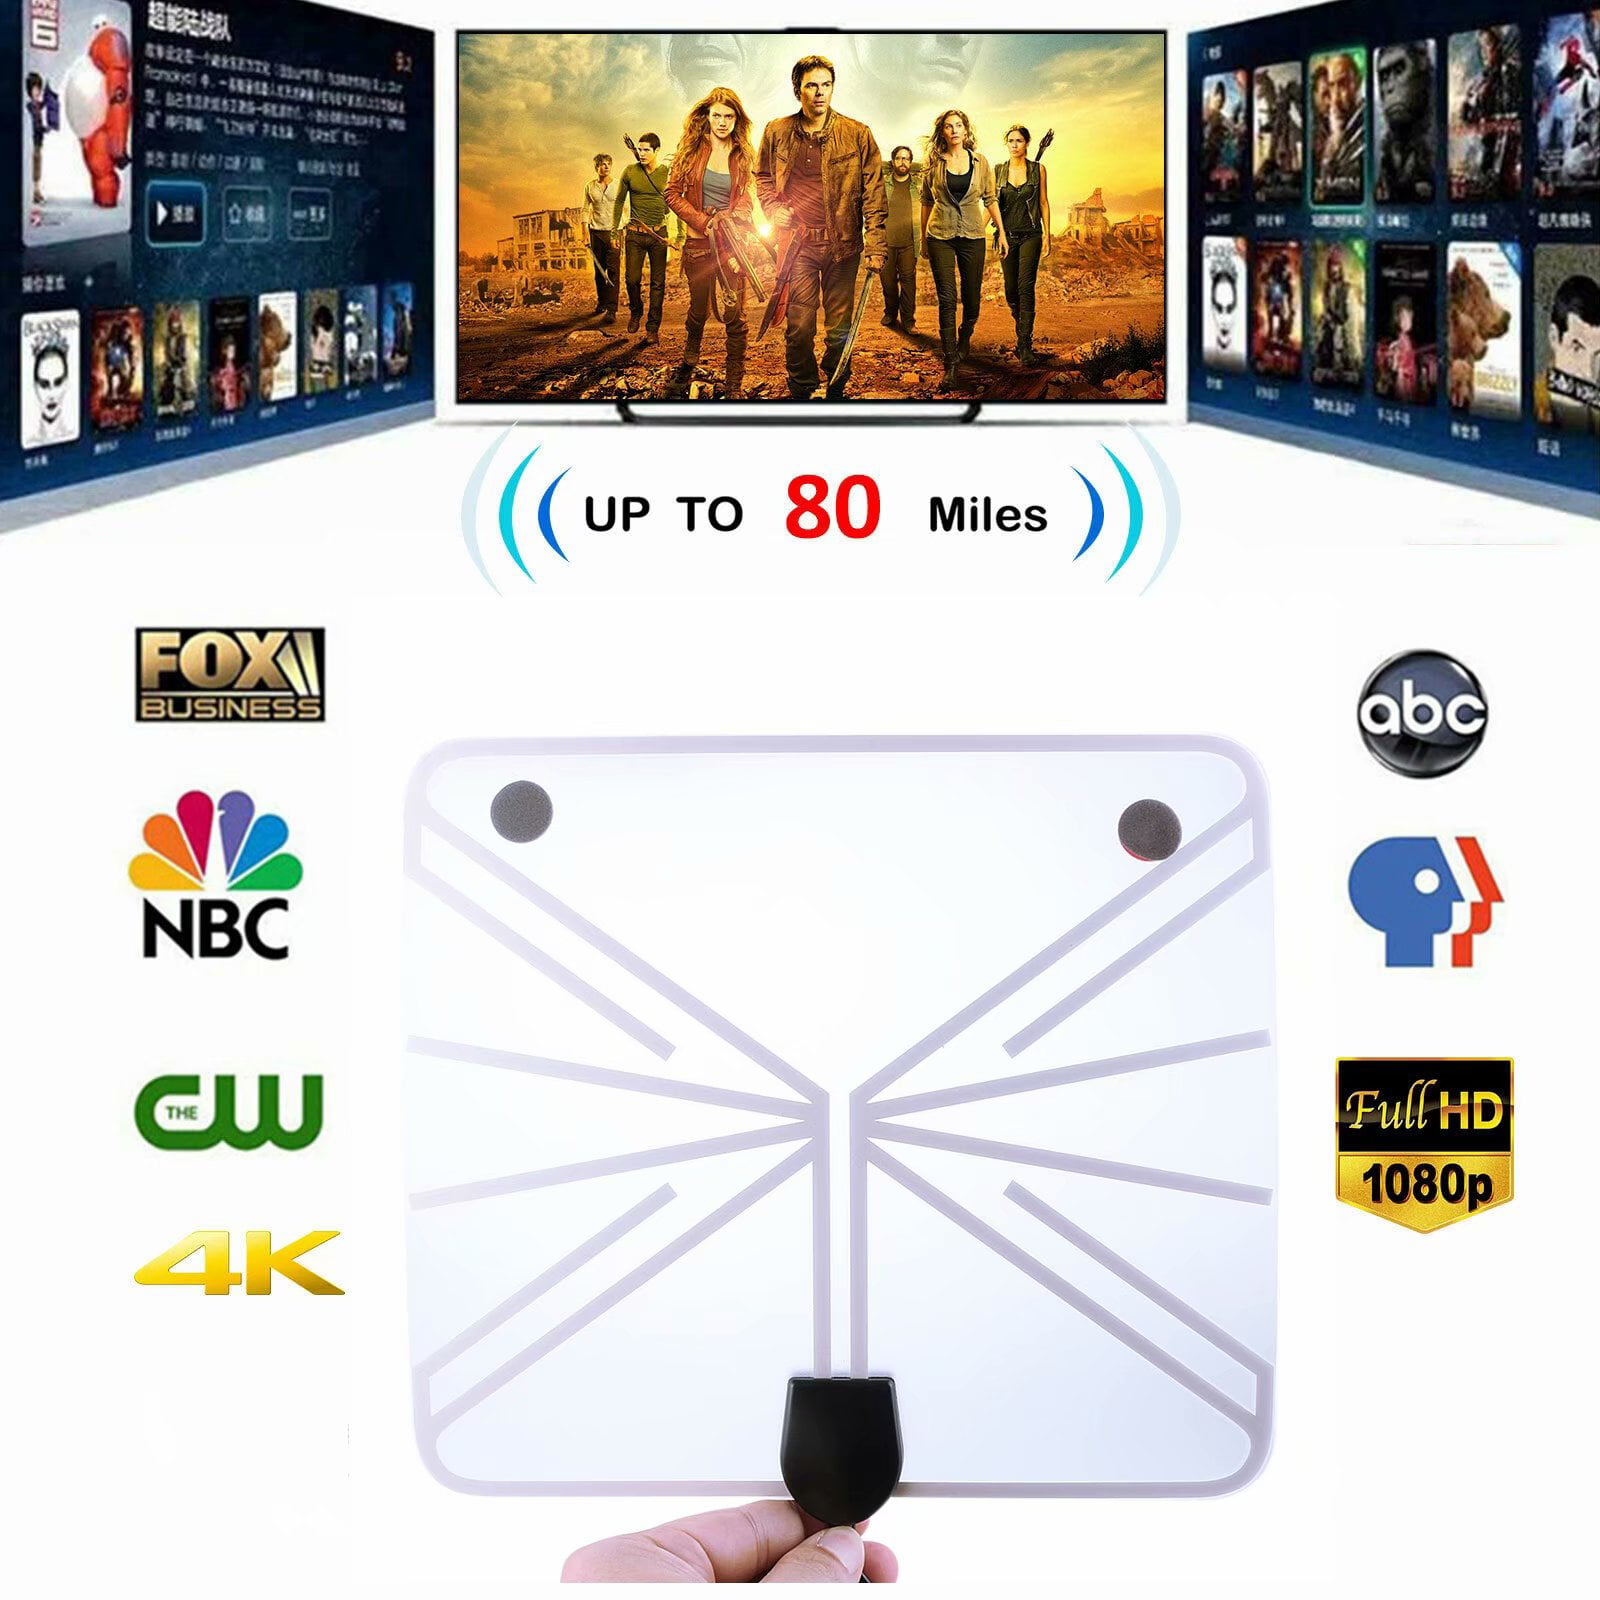 Hdtv Antenna Indoor Digital Tv Antenna 120miles Range With The Latest Amplifier Signal Booster 4k Local Channels Broadcast For All Types Of Smart Digital Television Walmart Com Walmart Com